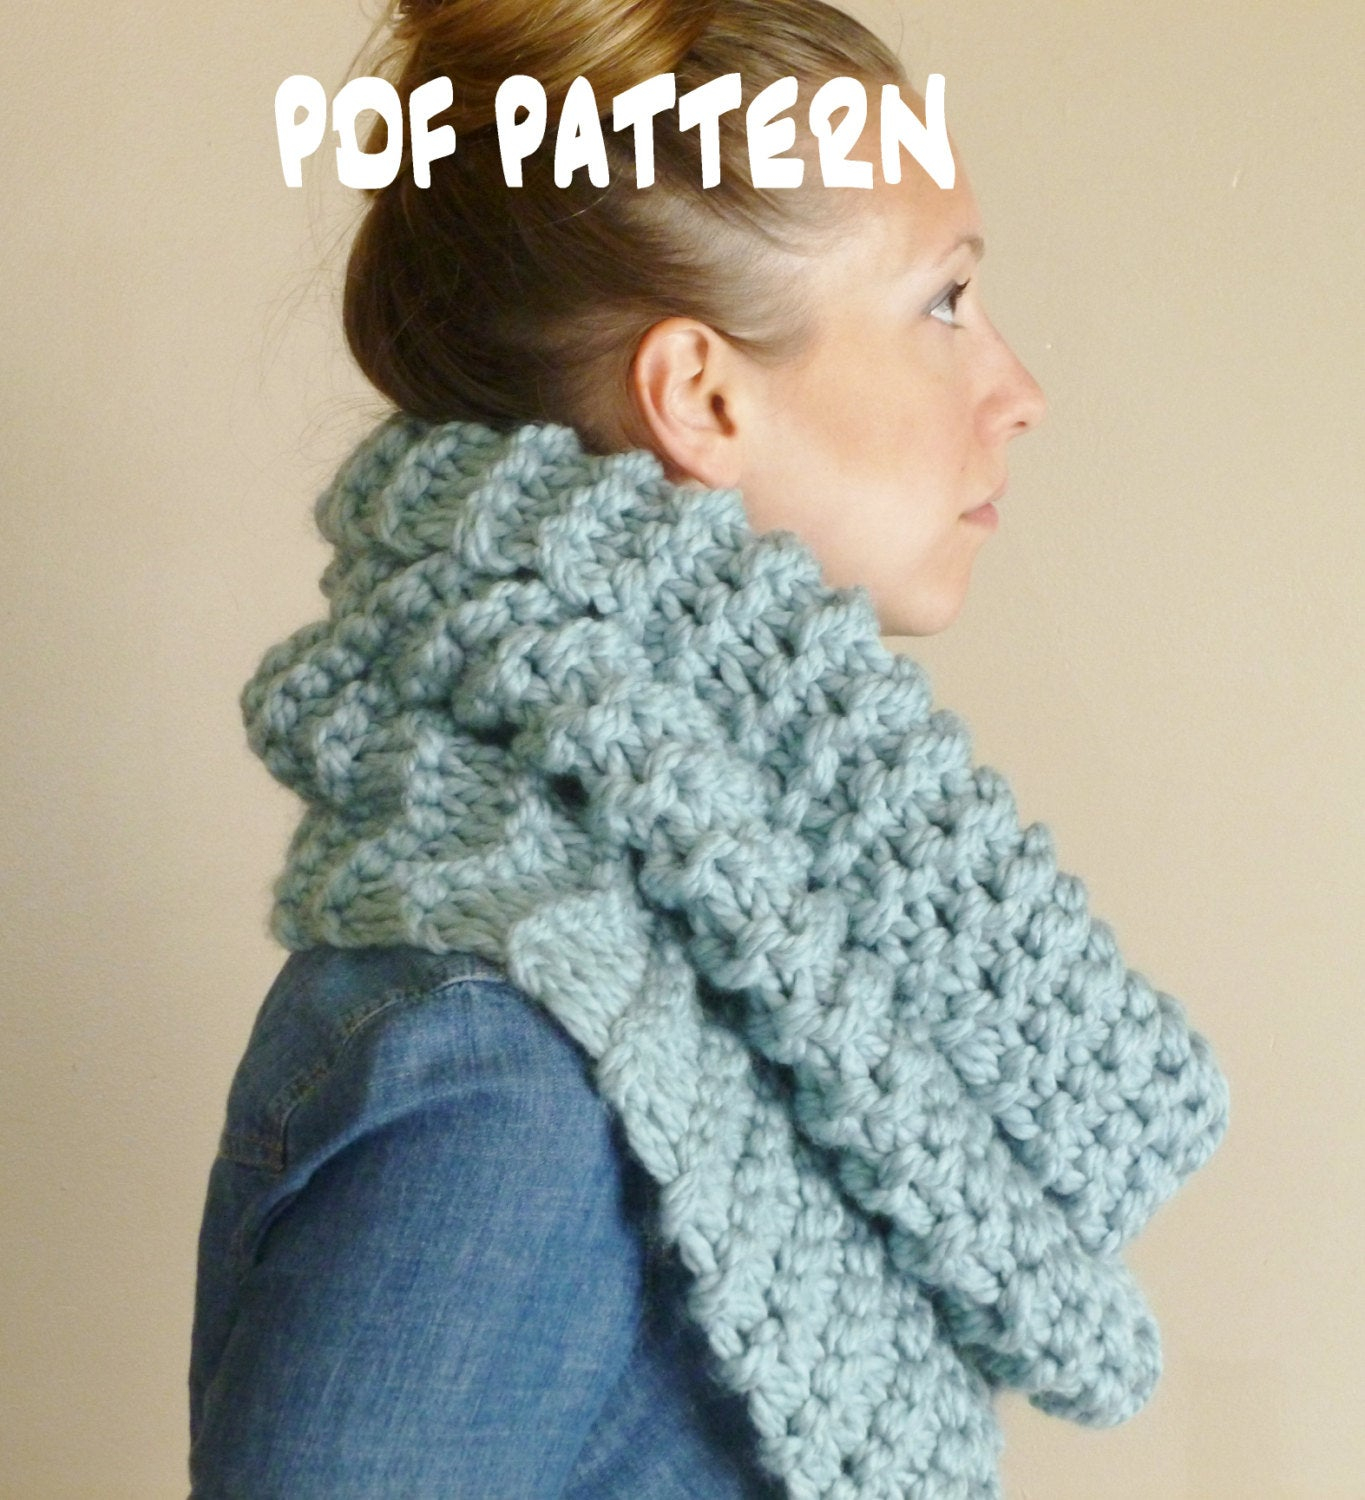 Chunky Knit Infinity Scarf Pattern Chunky Scarf Knitting Pattern The Strasburg Scarf Outlander Inspired Cowl Infinity Scarf Pattern Scarf Patterns Hooded Cowl Pattern